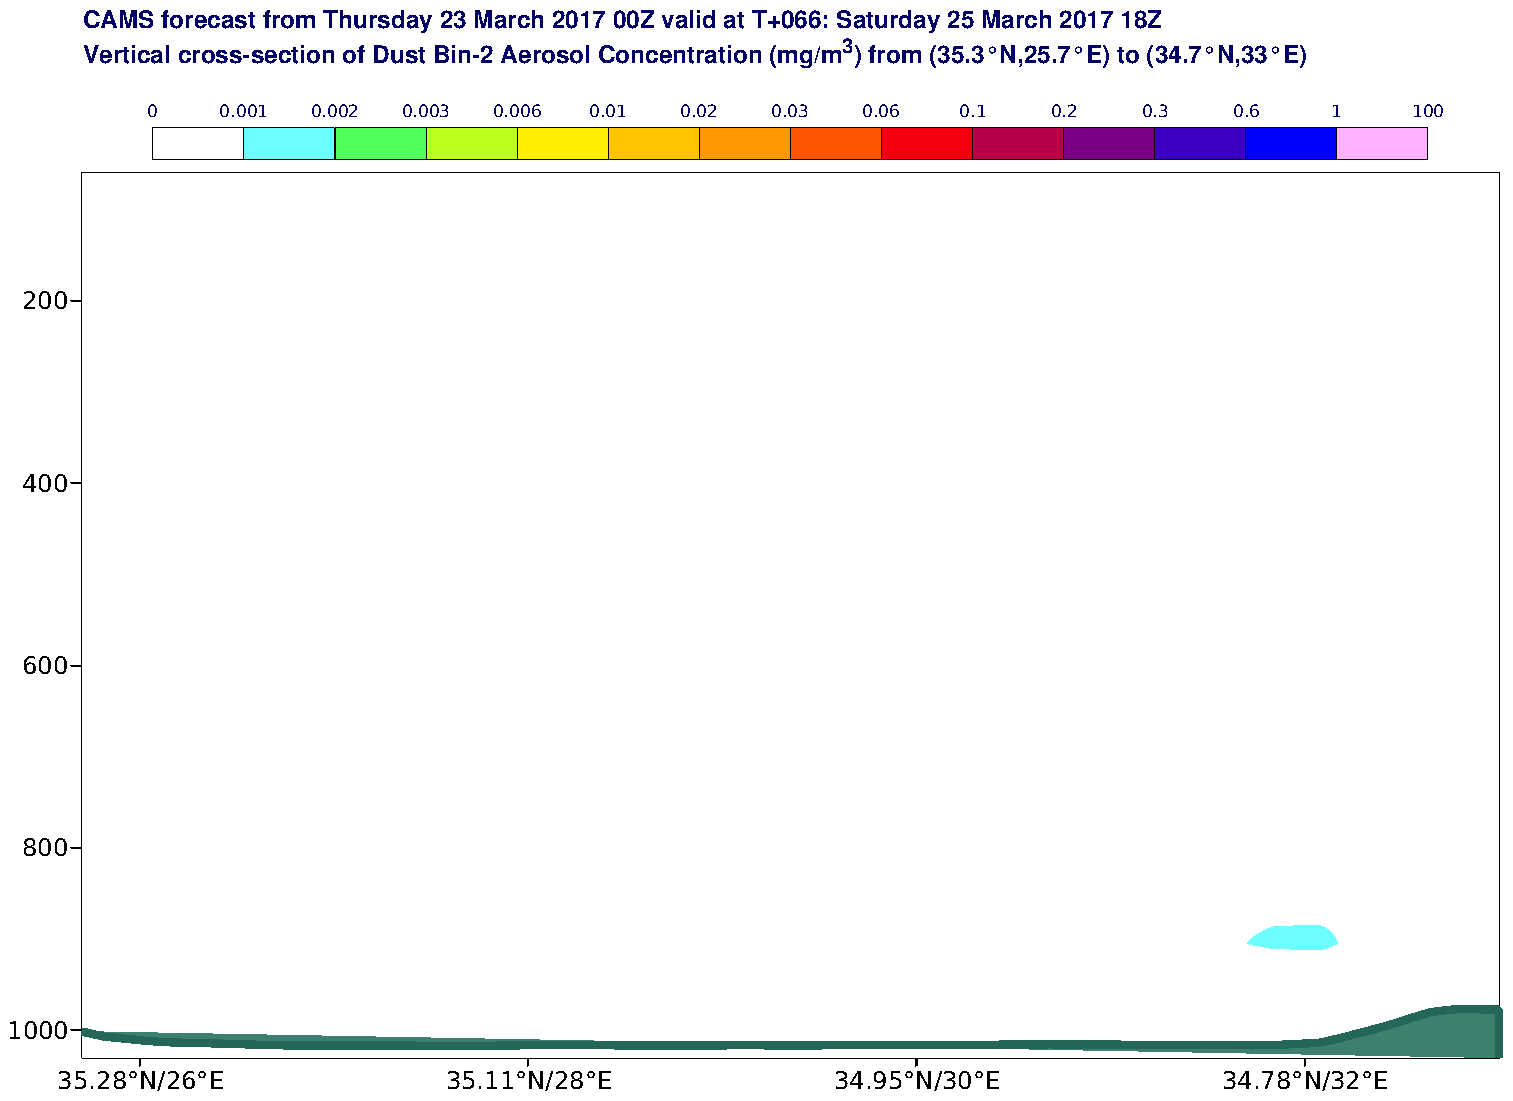 Vertical cross-section of Dust Bin-2 Aerosol Concentration (mg/m3) valid at T66 - 2017-03-25 18:00